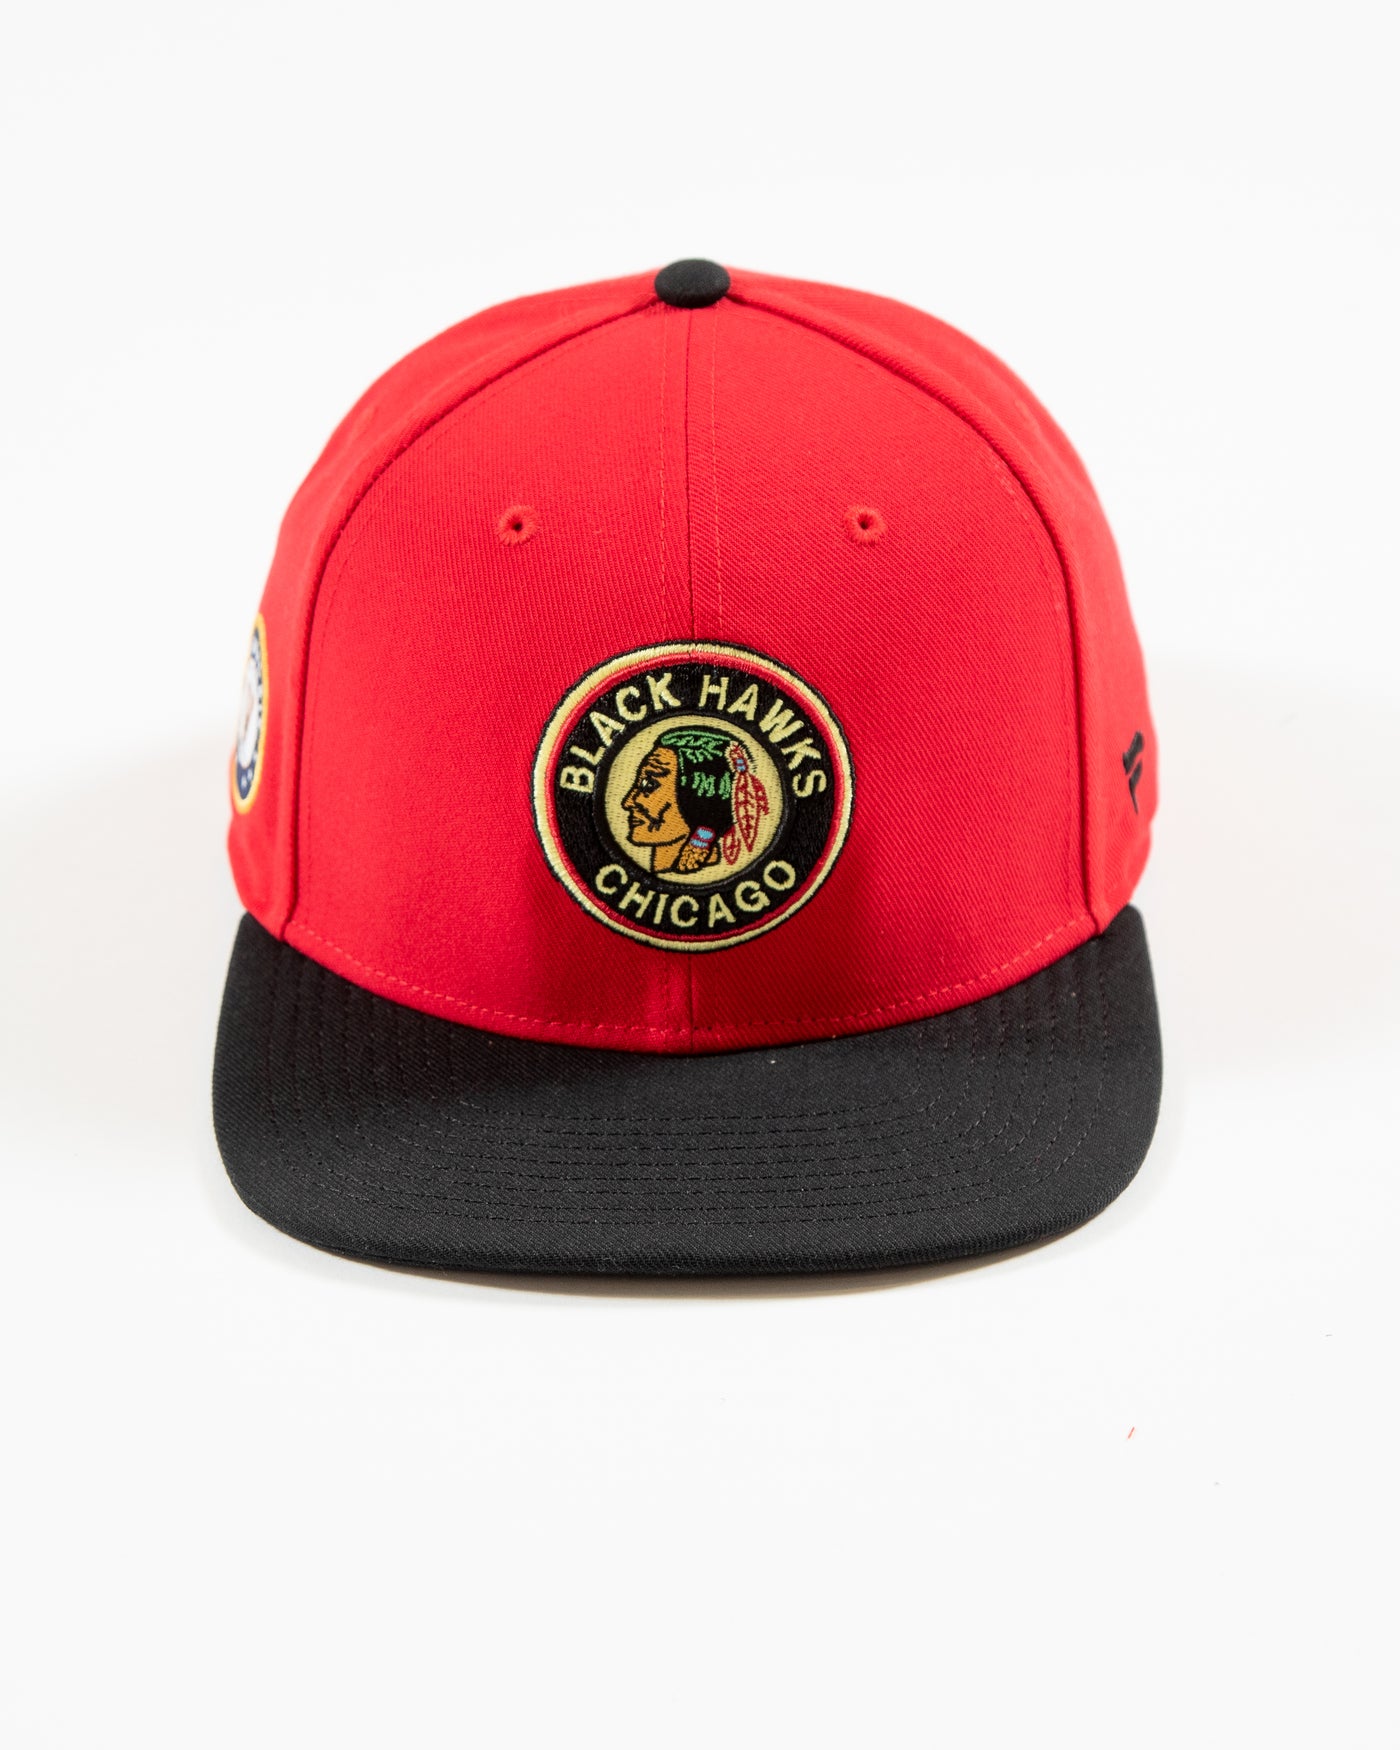 Red and black Fanatics snapback with vintage Chicago Blackhawks logo embroidered on front and original six patch embroidered on right side - front lay flat